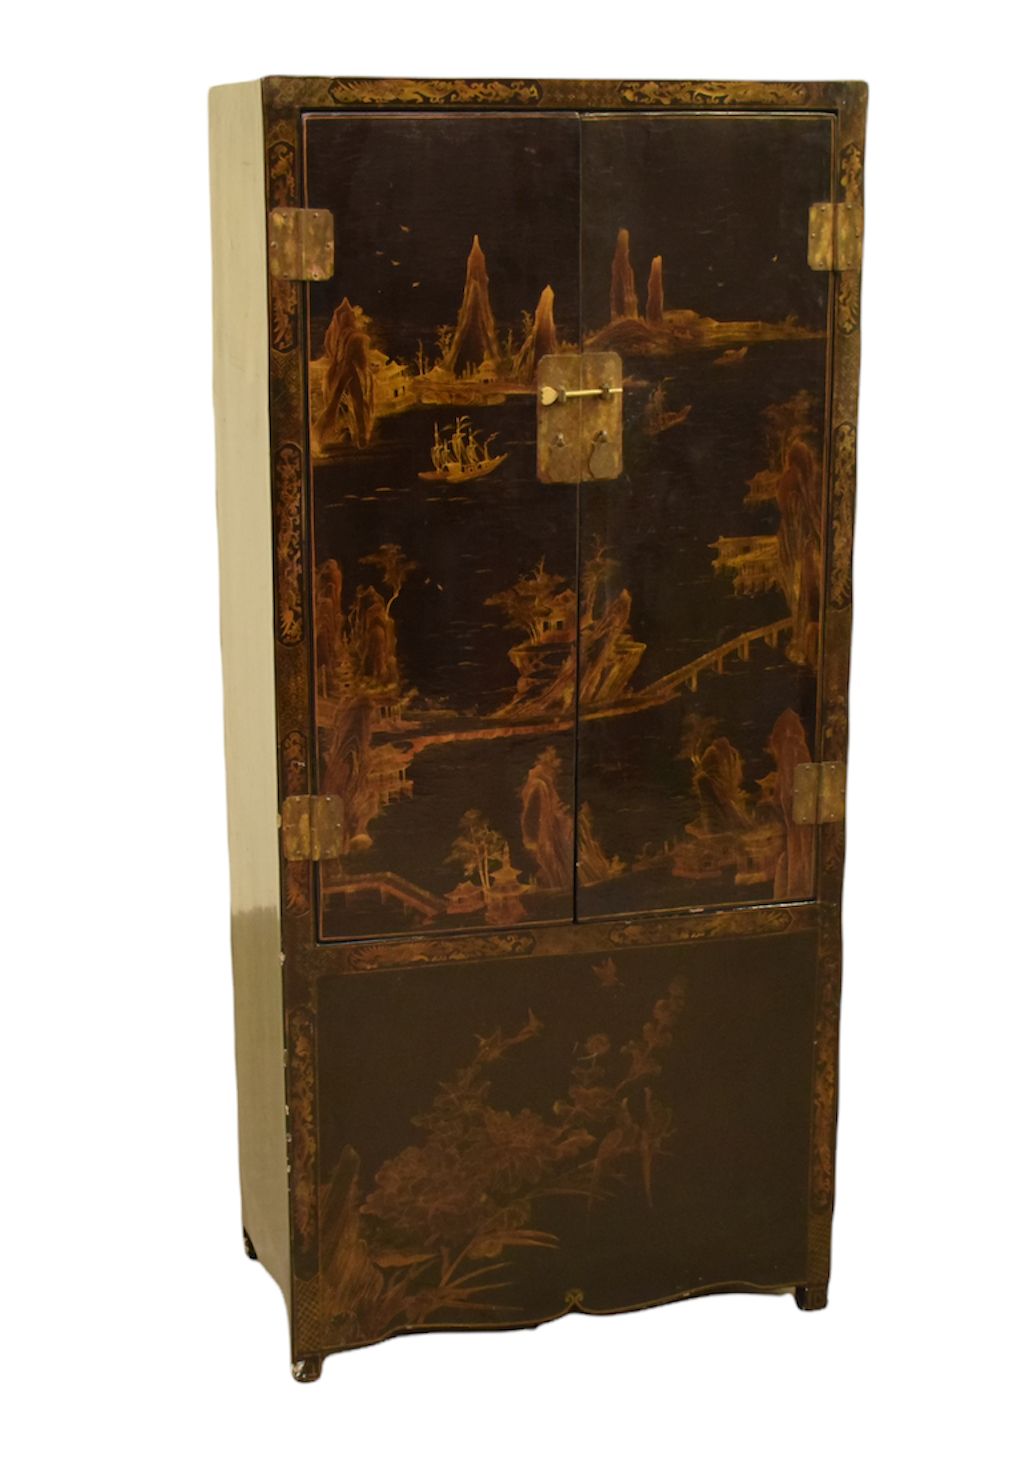 Null CABINET

In black lacquered wood decorated with lake landscapes, junks, bri&hellip;